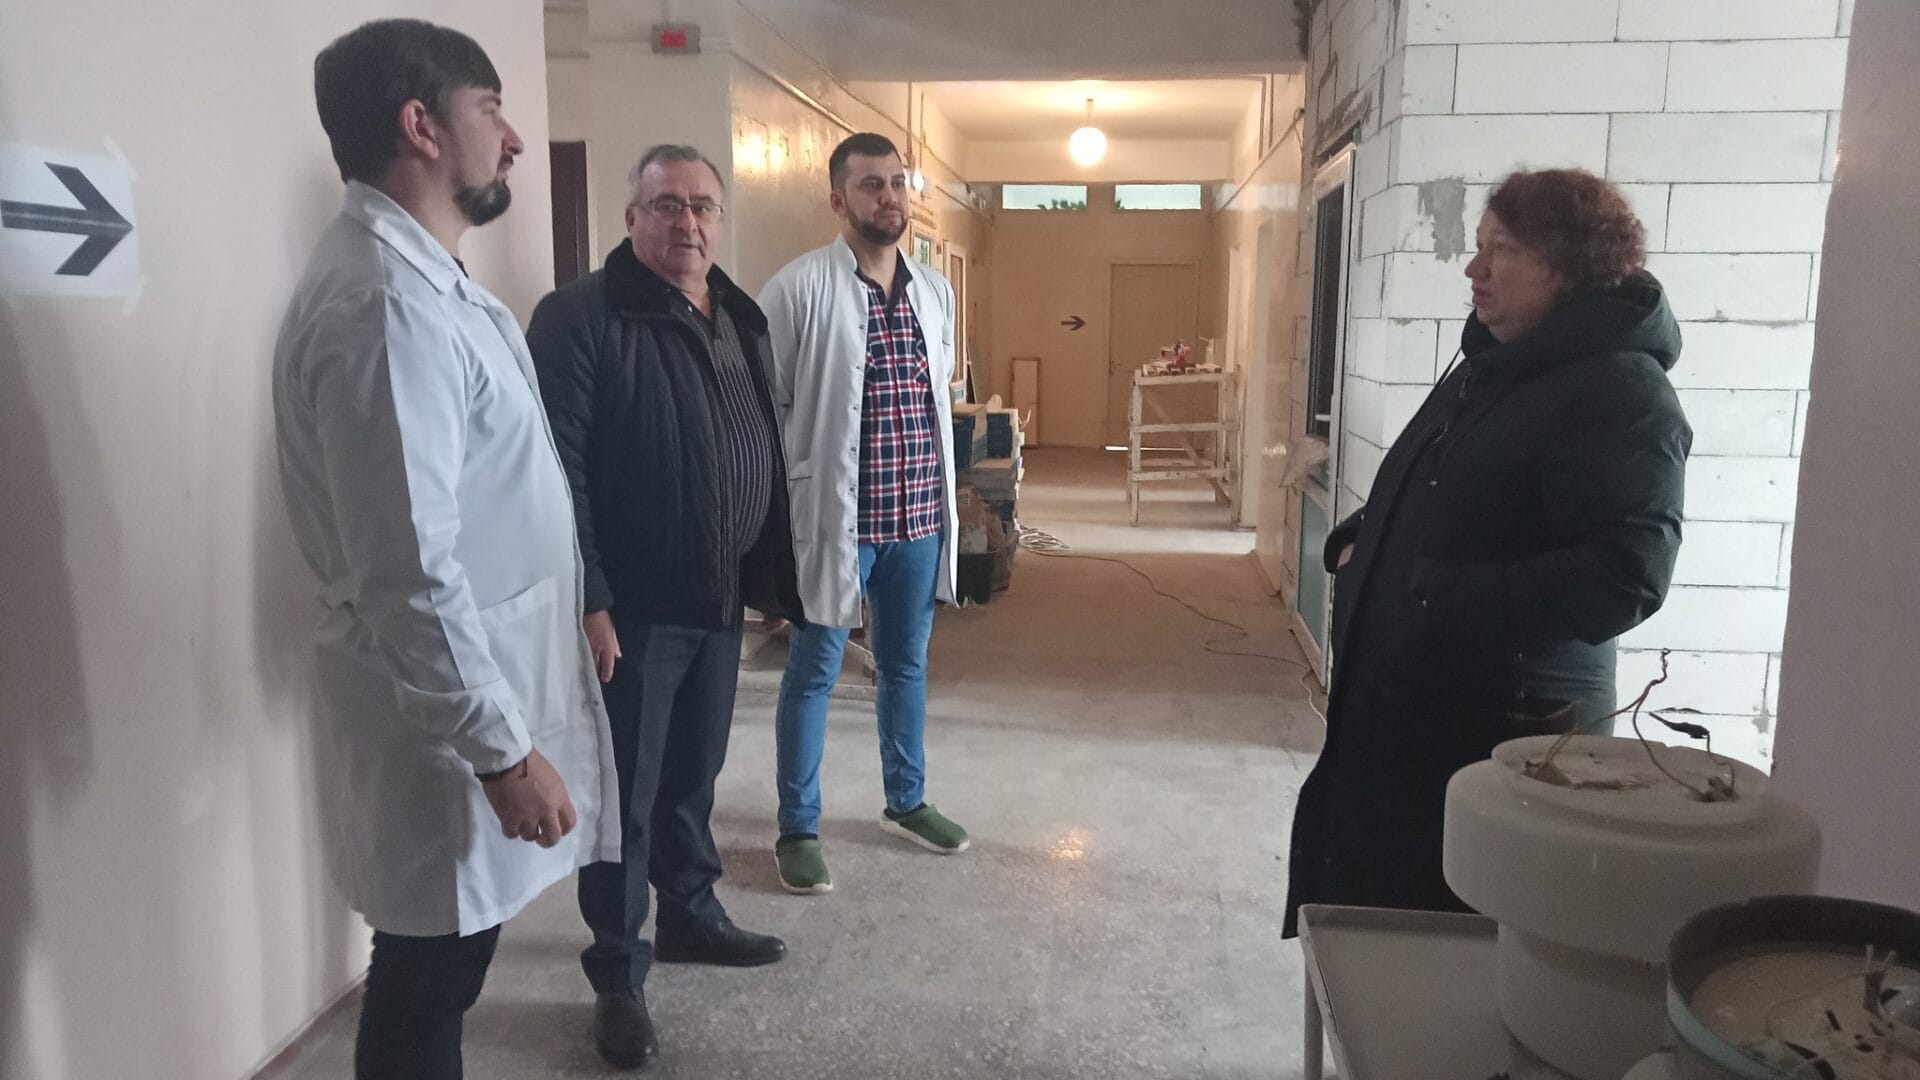 Community Head and colleagues visiting a facility